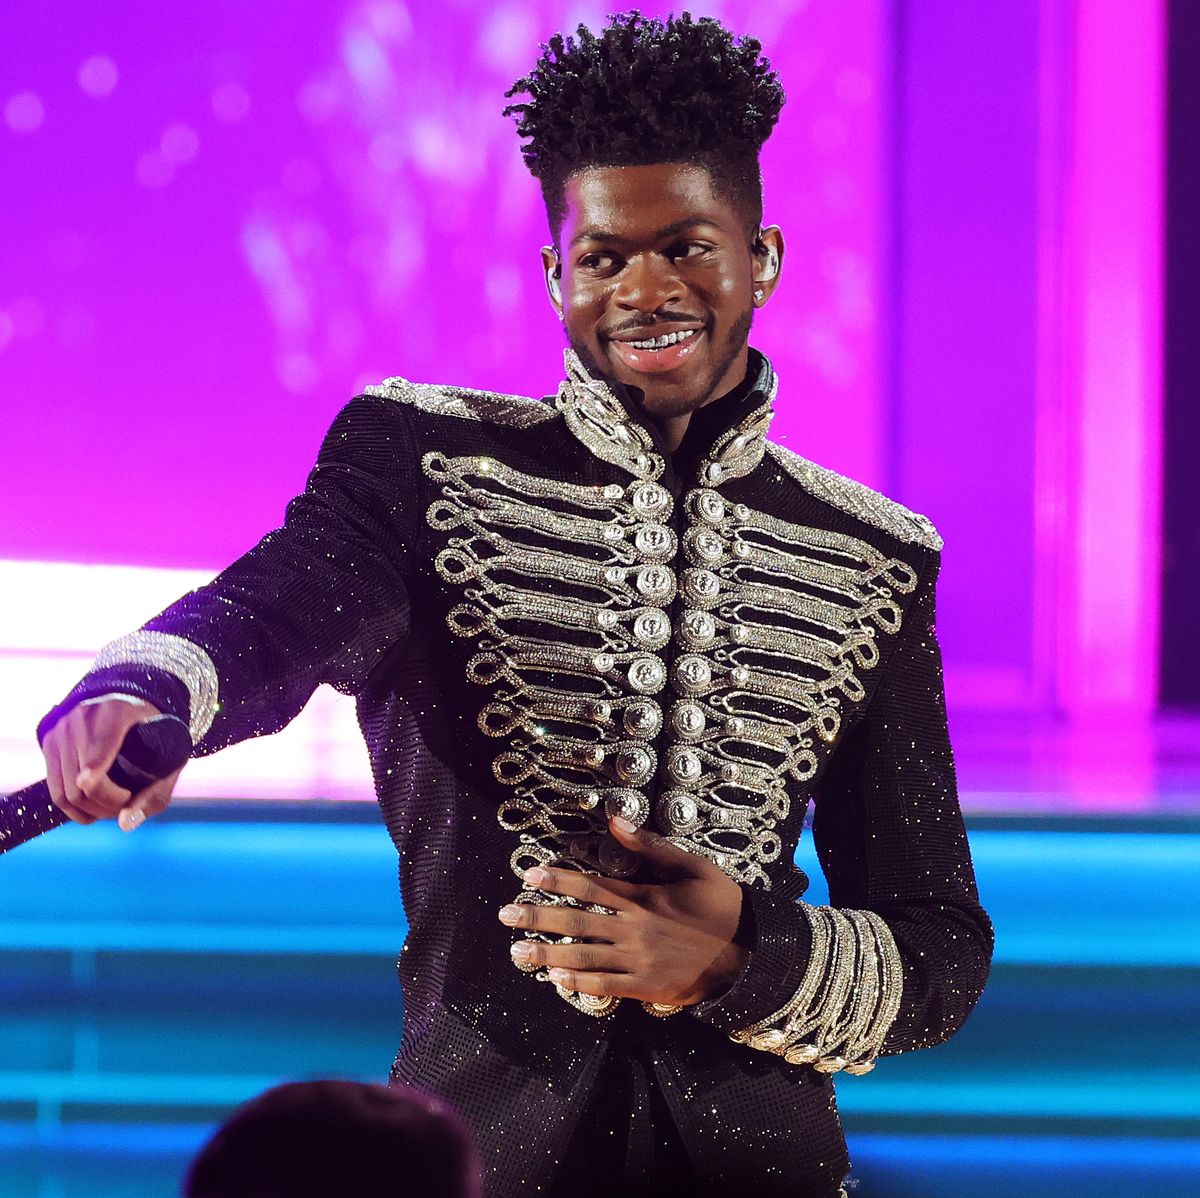 las vegas, nevada april 03 lil nas x performs onstage during the 64th annual grammy awards at mgm grand garden arena on april 03, 2022 in las vegas, nevada photo by rich furygetty images for the recording academy